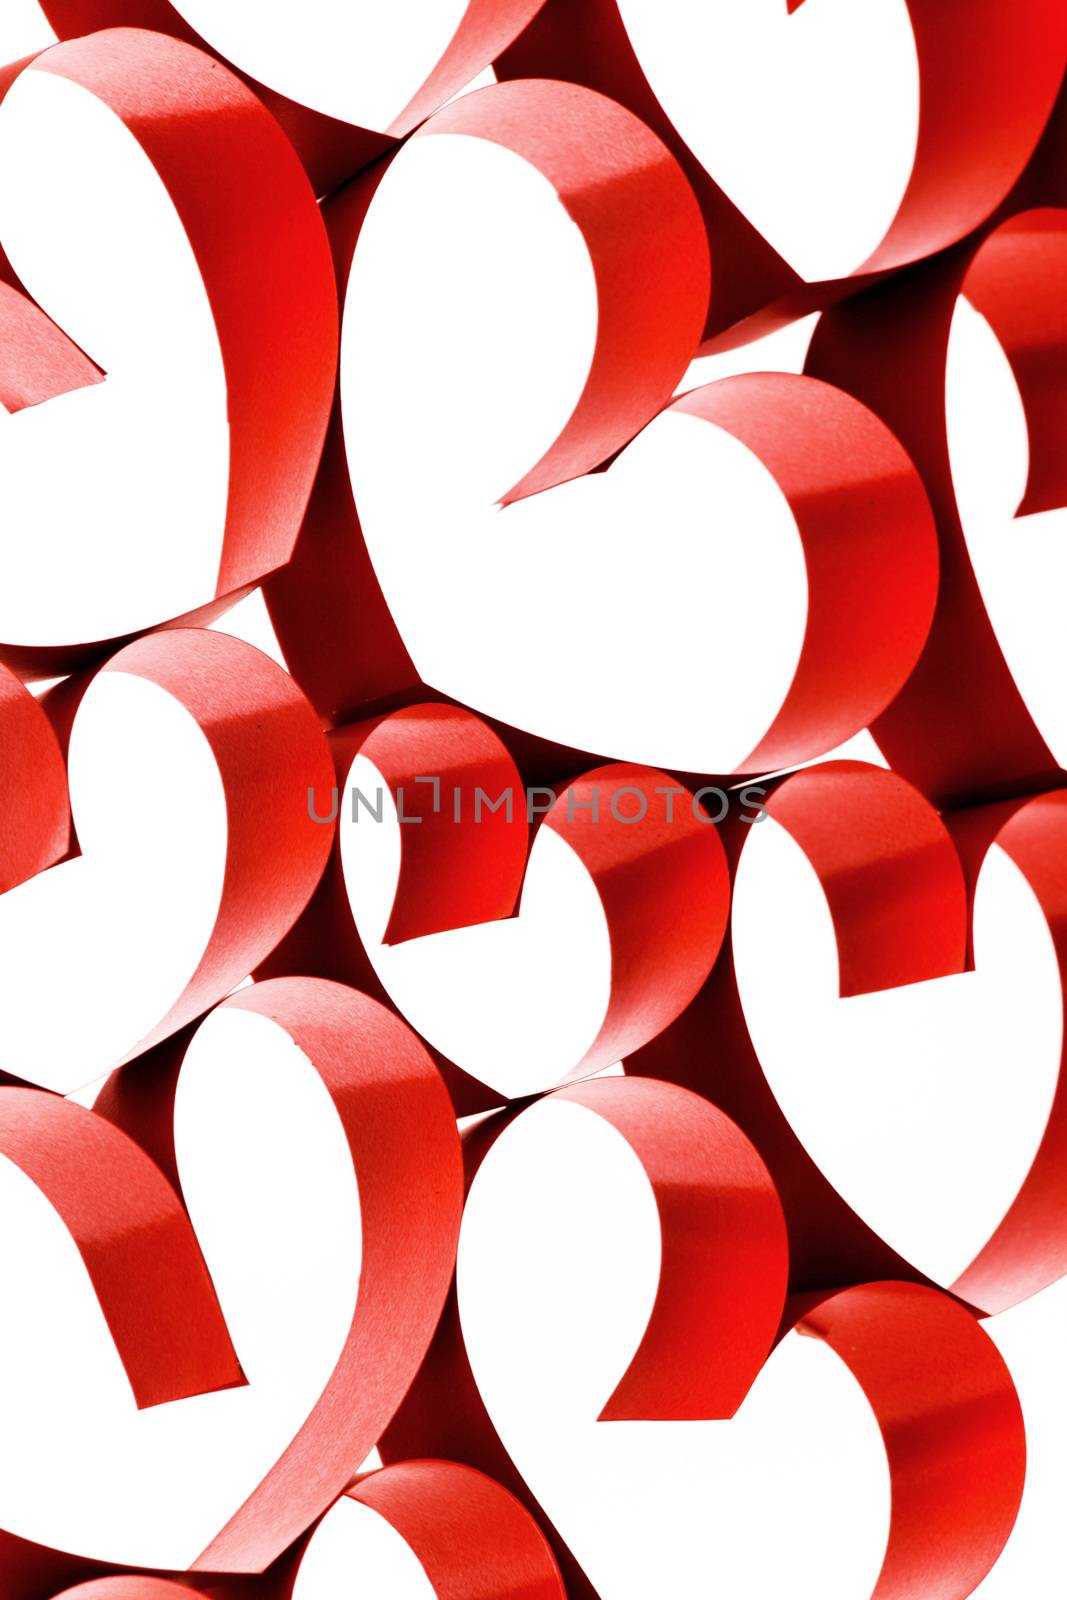 Red ribbons shaped as hearts on white background